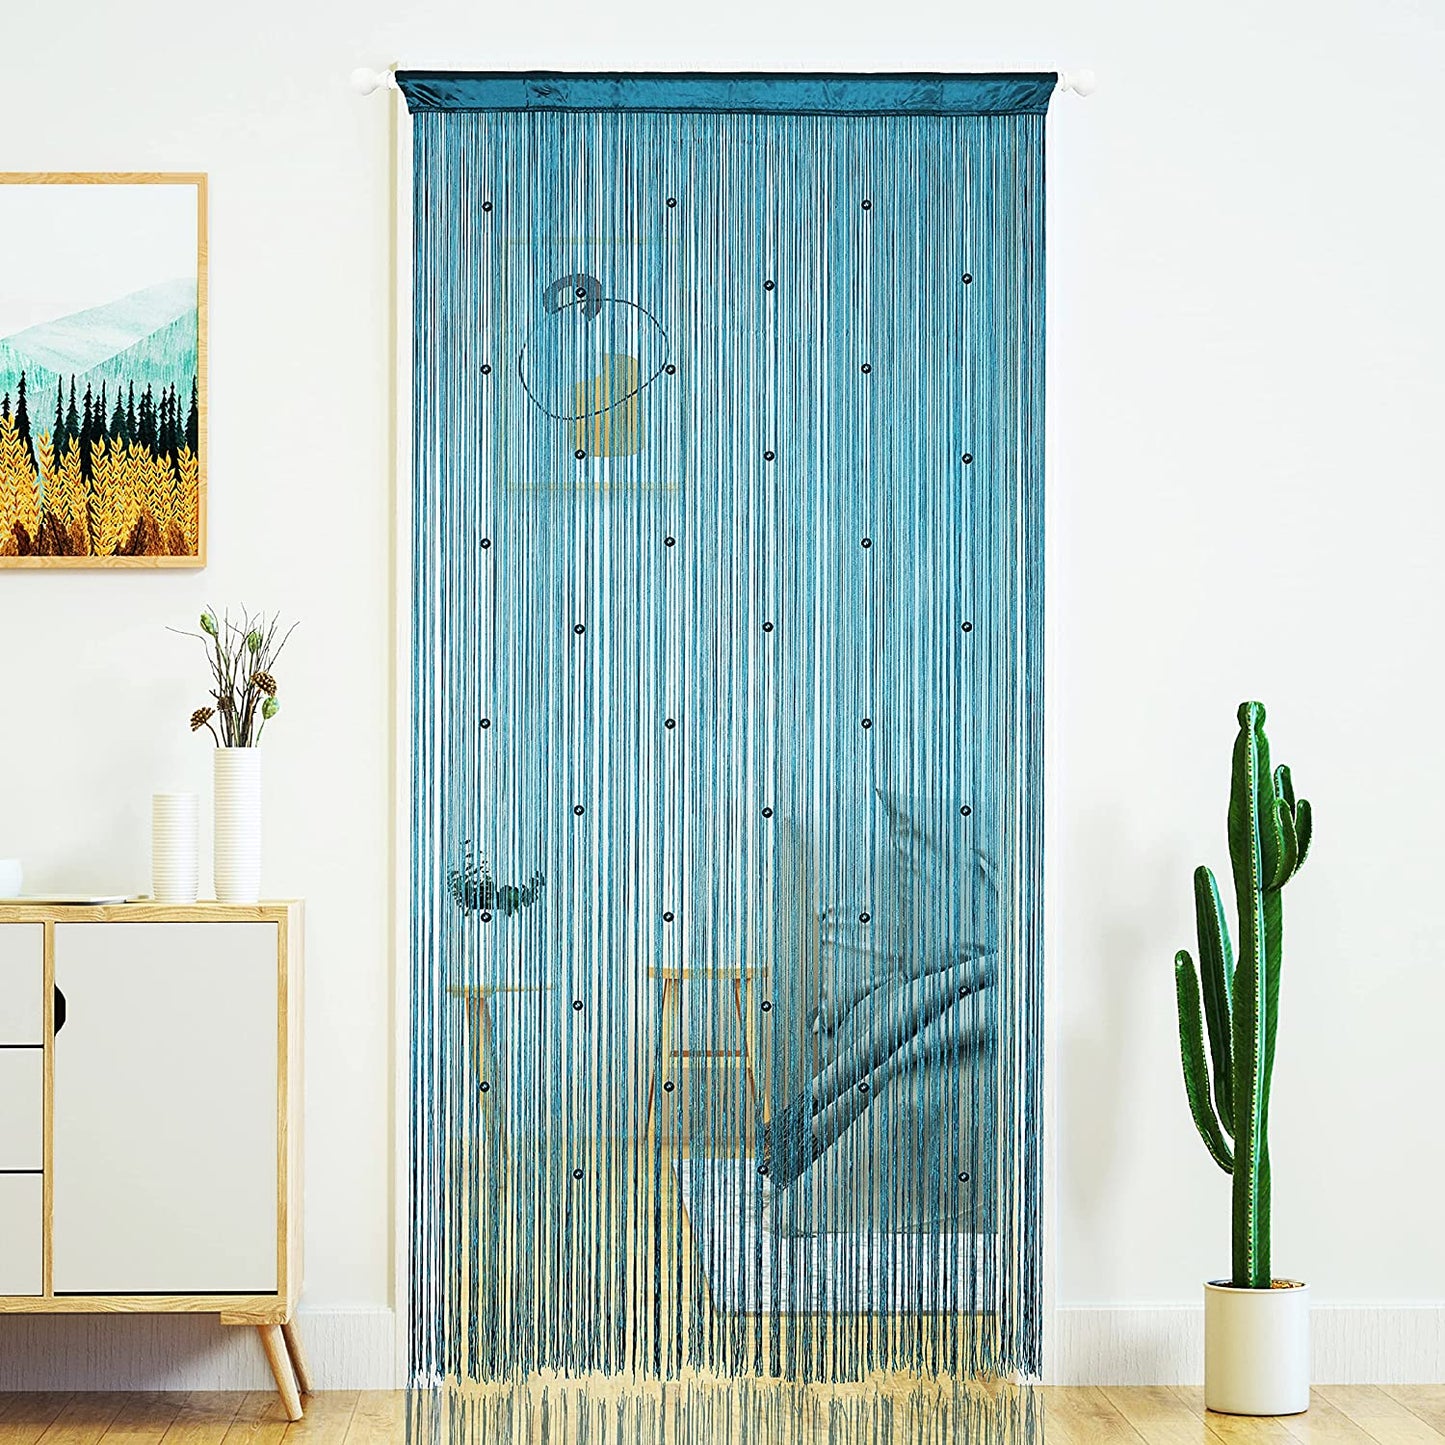 Yaoyue Beaded Curtain Door String Curtains for Doorway Tassels Beads Hanging Fringe Hippie Room Divider Window Hallway Entrance Wall Closet Bedroom Privacy Decor (39×79In/100×200Cm, Light Coffee)  YaoYue Lake Blue 100×200Cm 